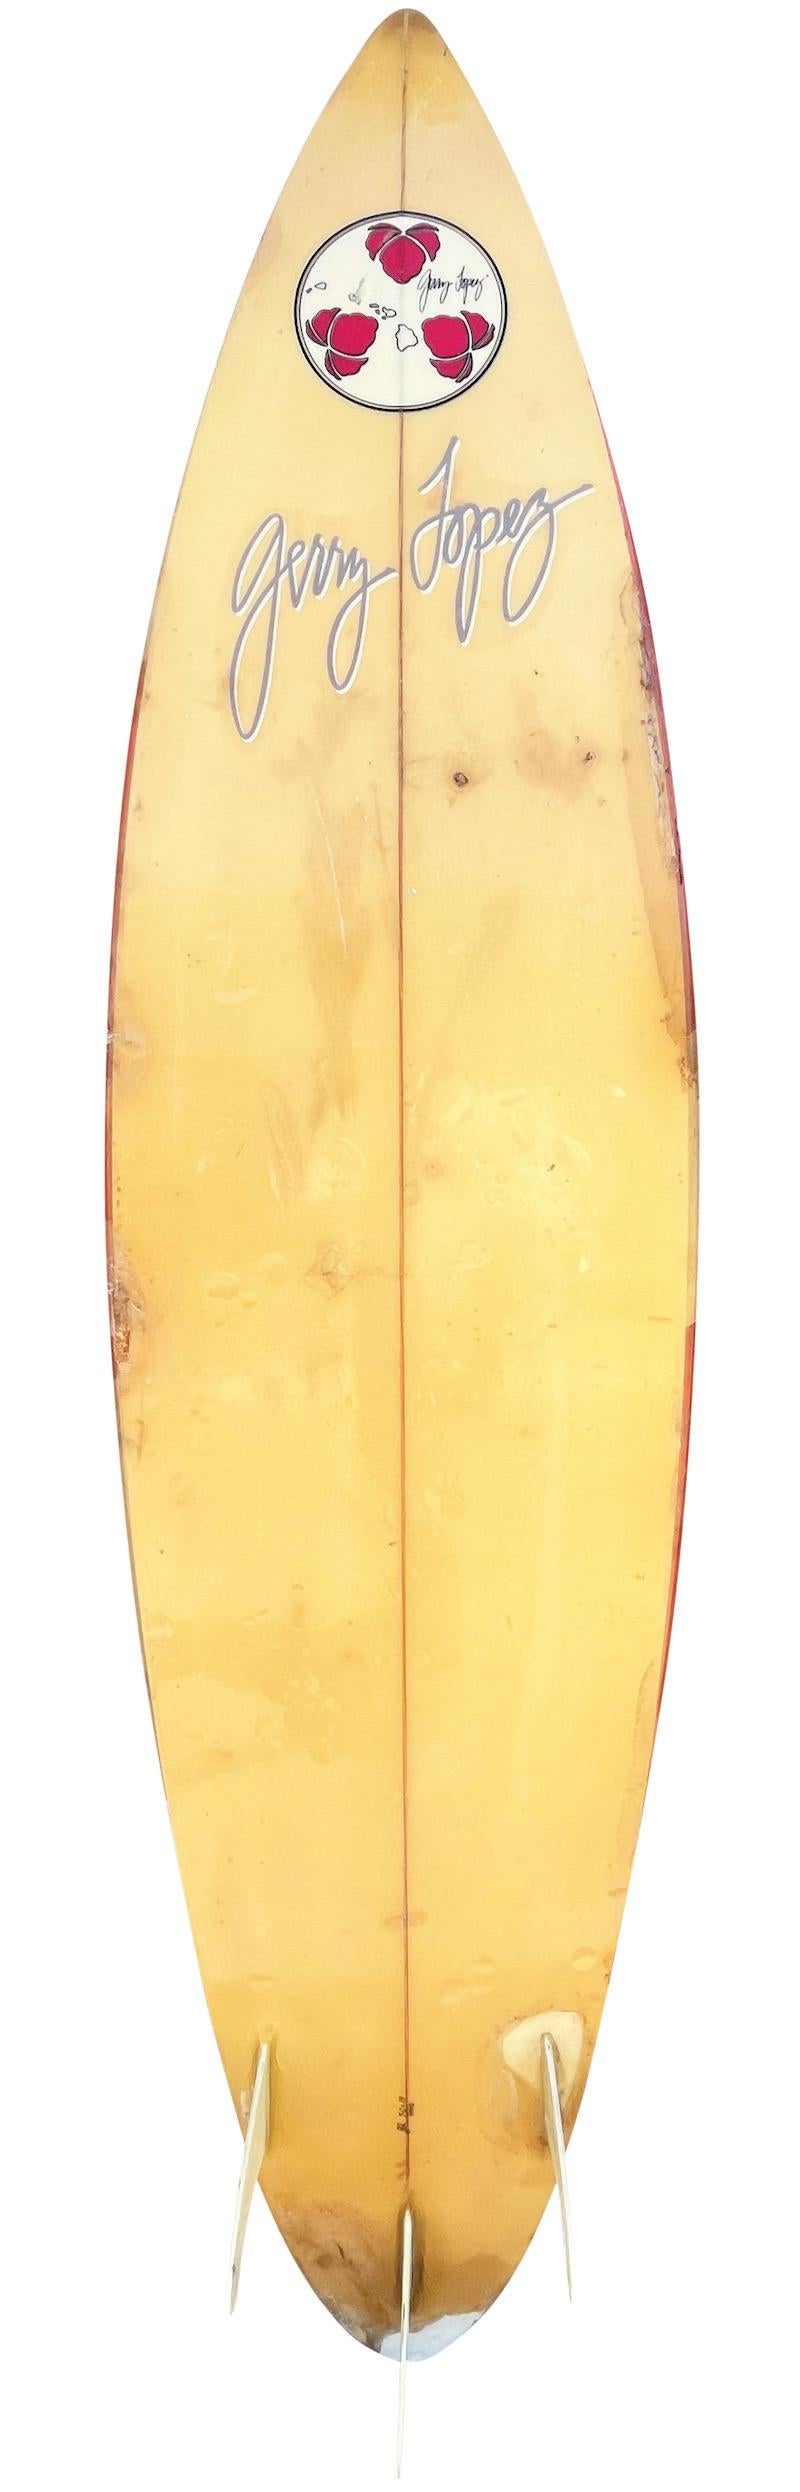 Late-1980s Gerry Lopez shaped thruster surfboard. Features an iconic camouflage airbrush pattern which Lopez boards were known for in the 1980s-90s. Hand signed by Gerry Lopez, “GL” which indicates the surfboard was handmade by Gerry Lopez and not